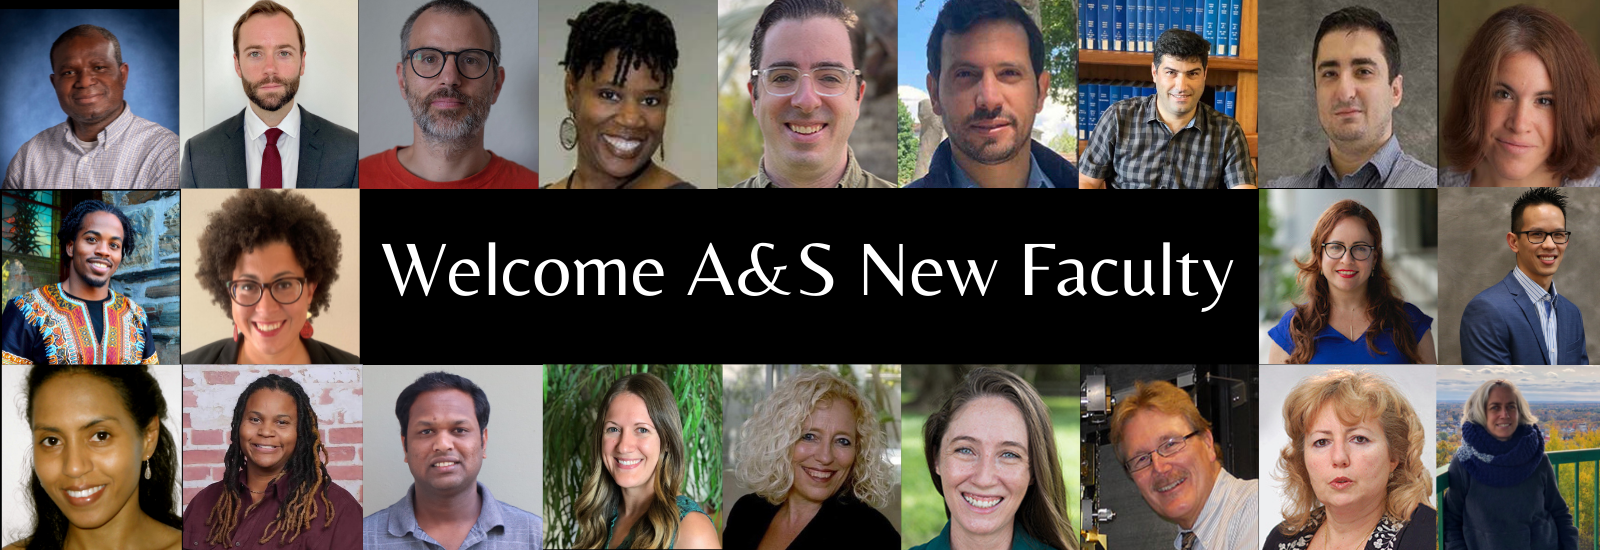 New Faculty Main Page Banner